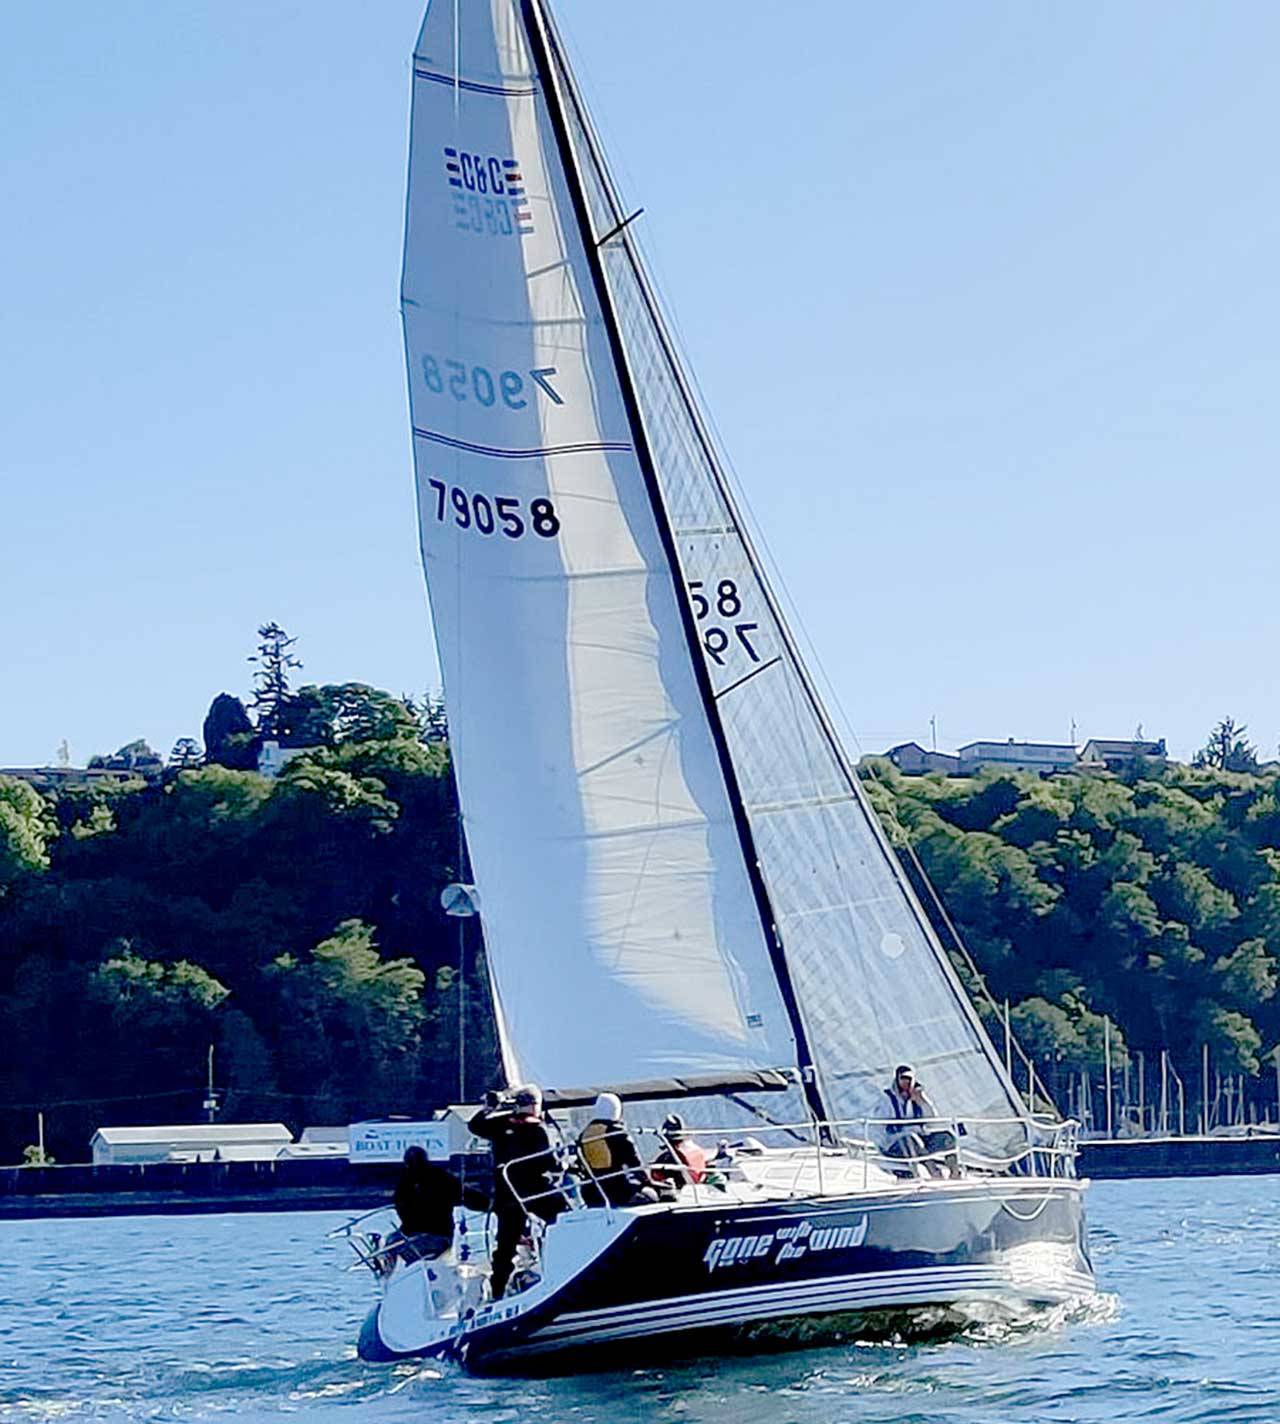 Port Angeles-based Gone with the Wind is one of 24 sailboats entered in the Pacific Northwest Offshore race from the Columbia River to Port Angeles. The race begins today and runs through Sunday.